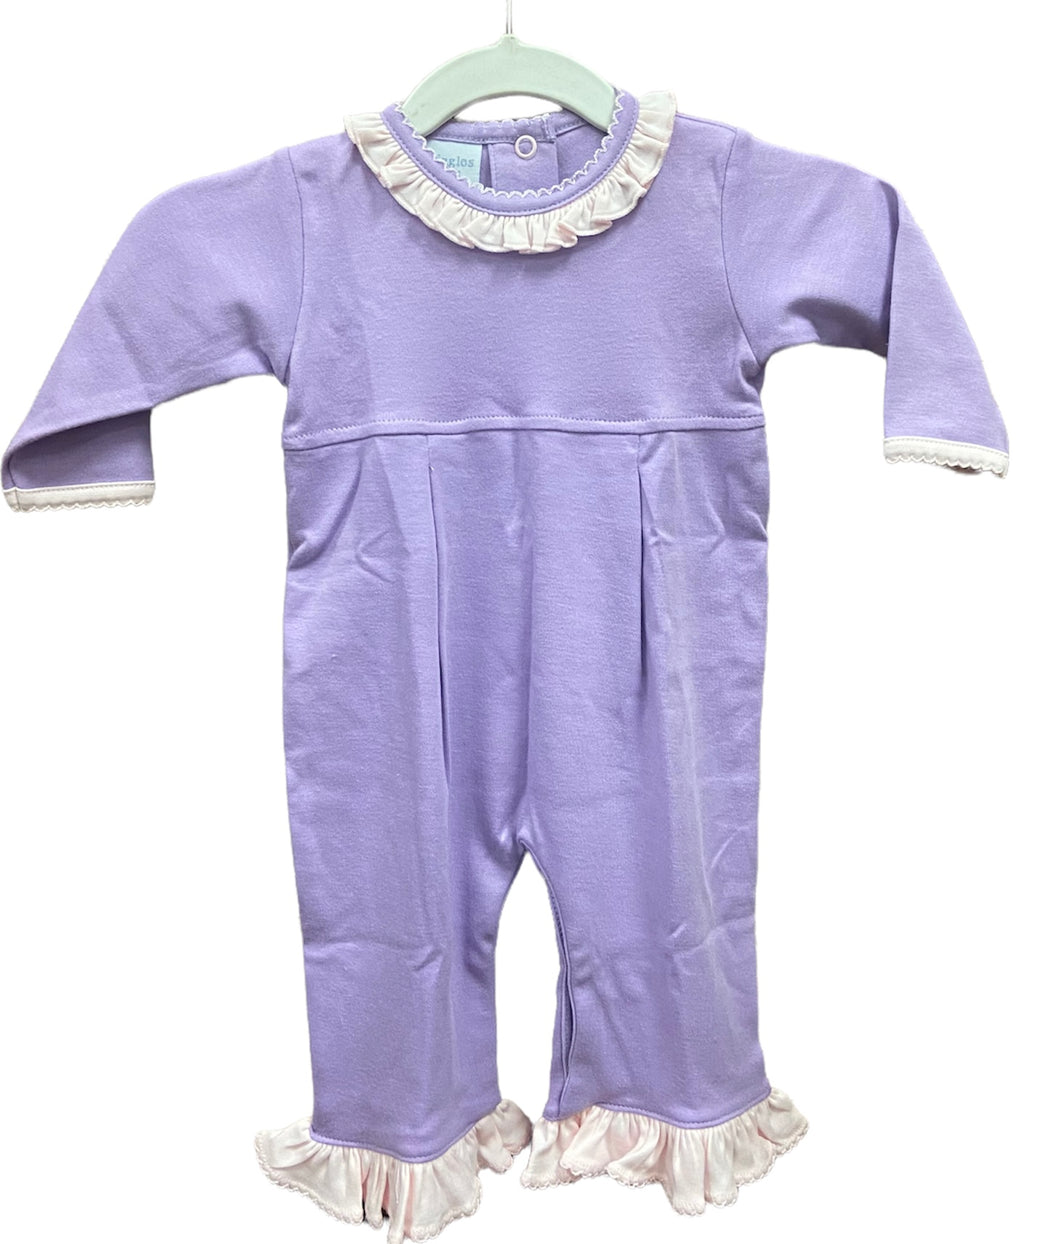 Purple with Pink Trim Romper by Squiggles